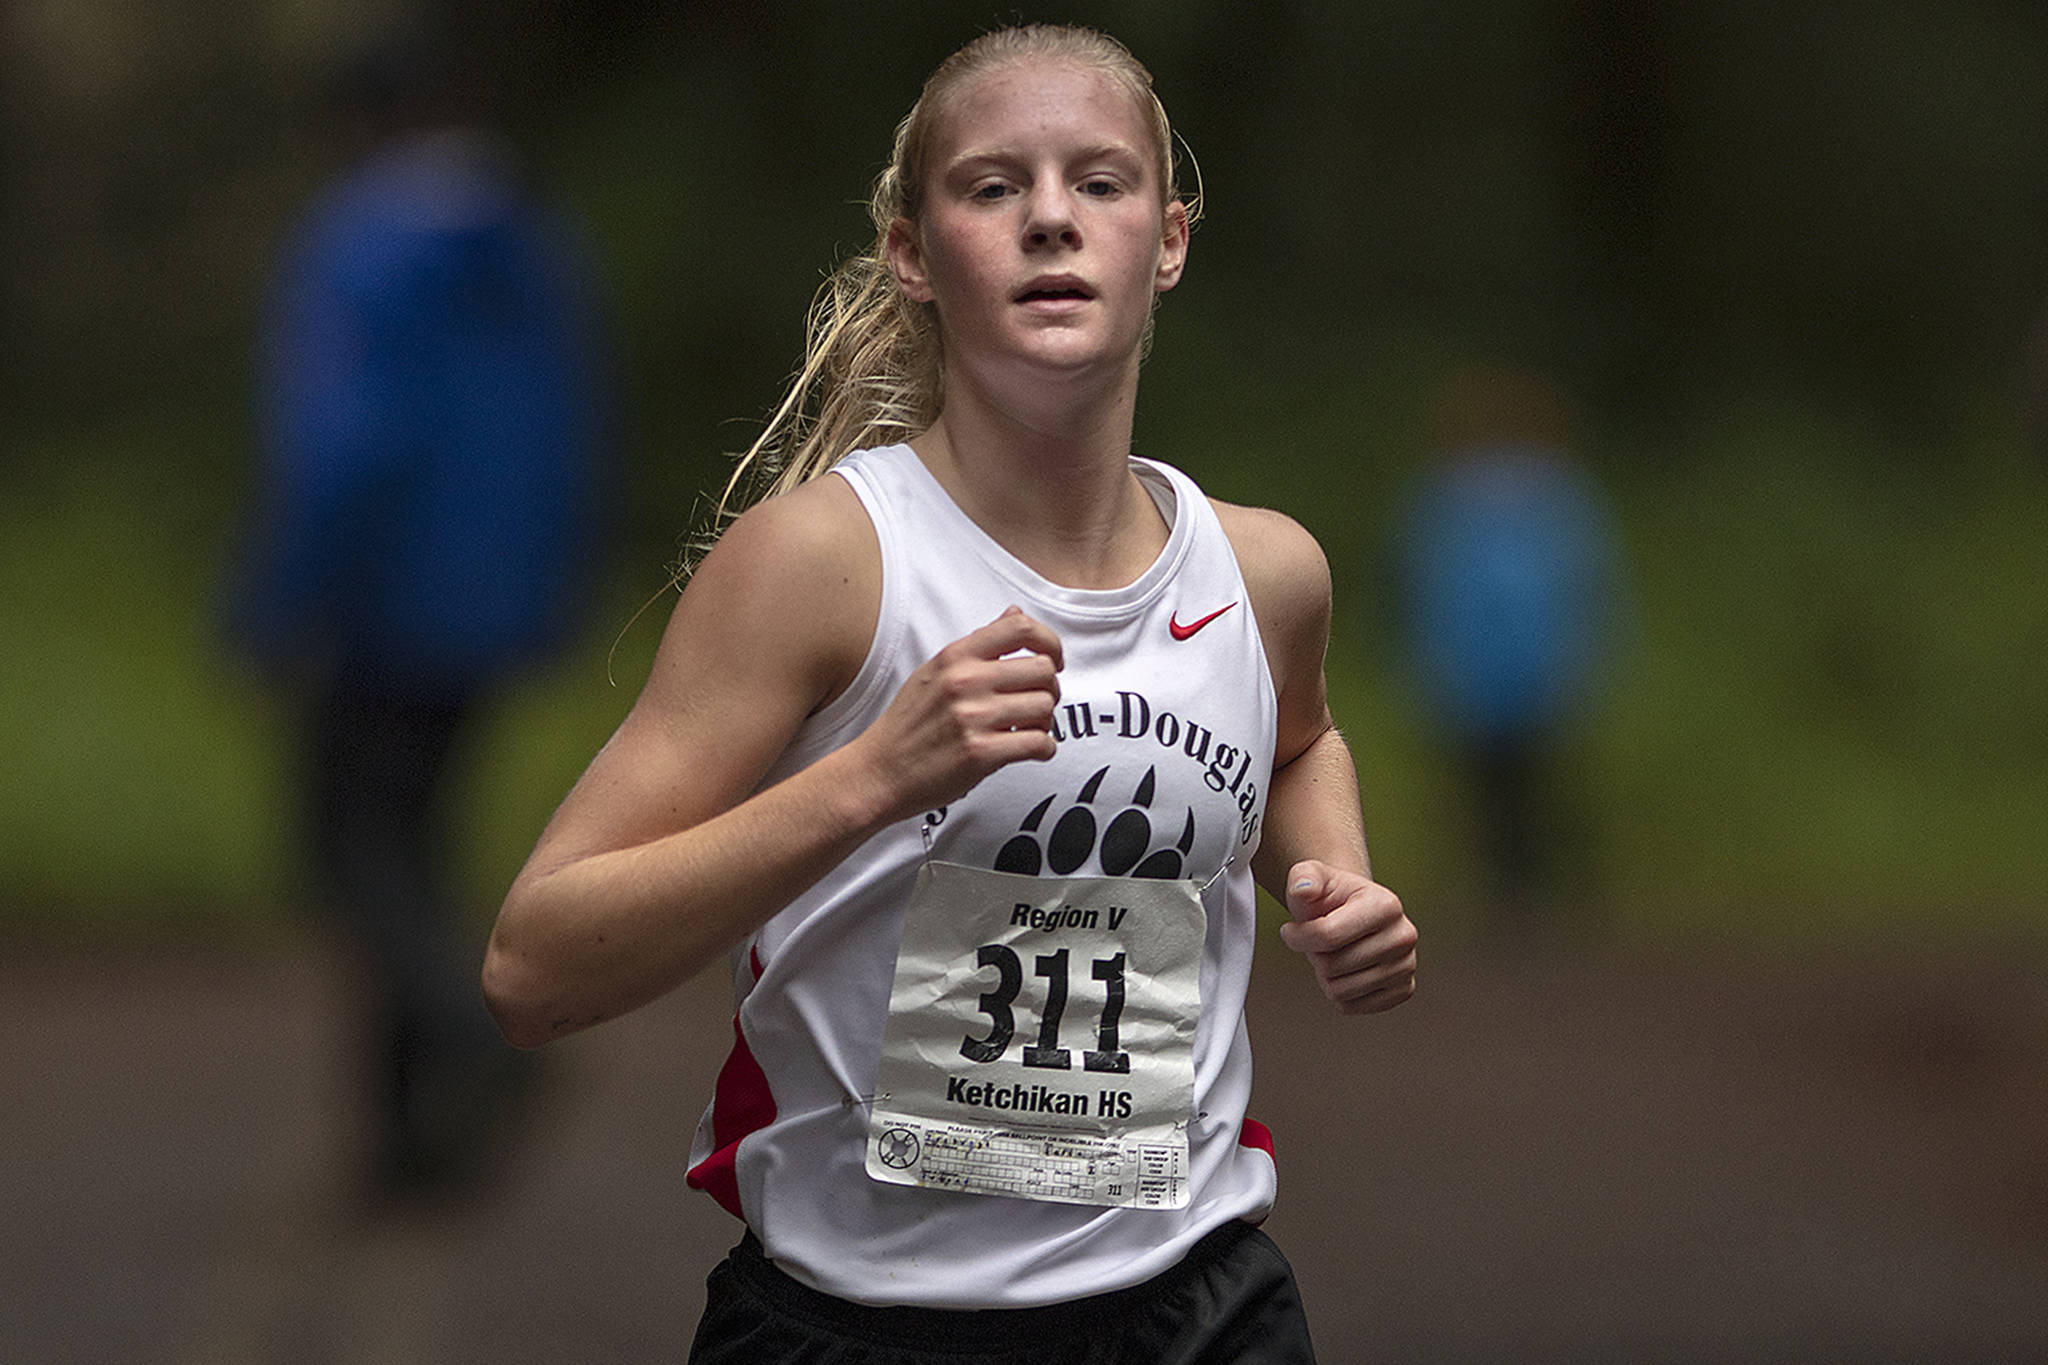 Juneau-Douglas High School senior Sadie Tuckwood runs with a big lead during the Ketchikan Invitational cross-country meet at Ward Lake in Ketchikan on Saturday, Sept. 21, 2019. Tuckwood finished first with a time of 18 minutes, 8 seconds. (Dustin Safranek | Ketchikan Daily News)